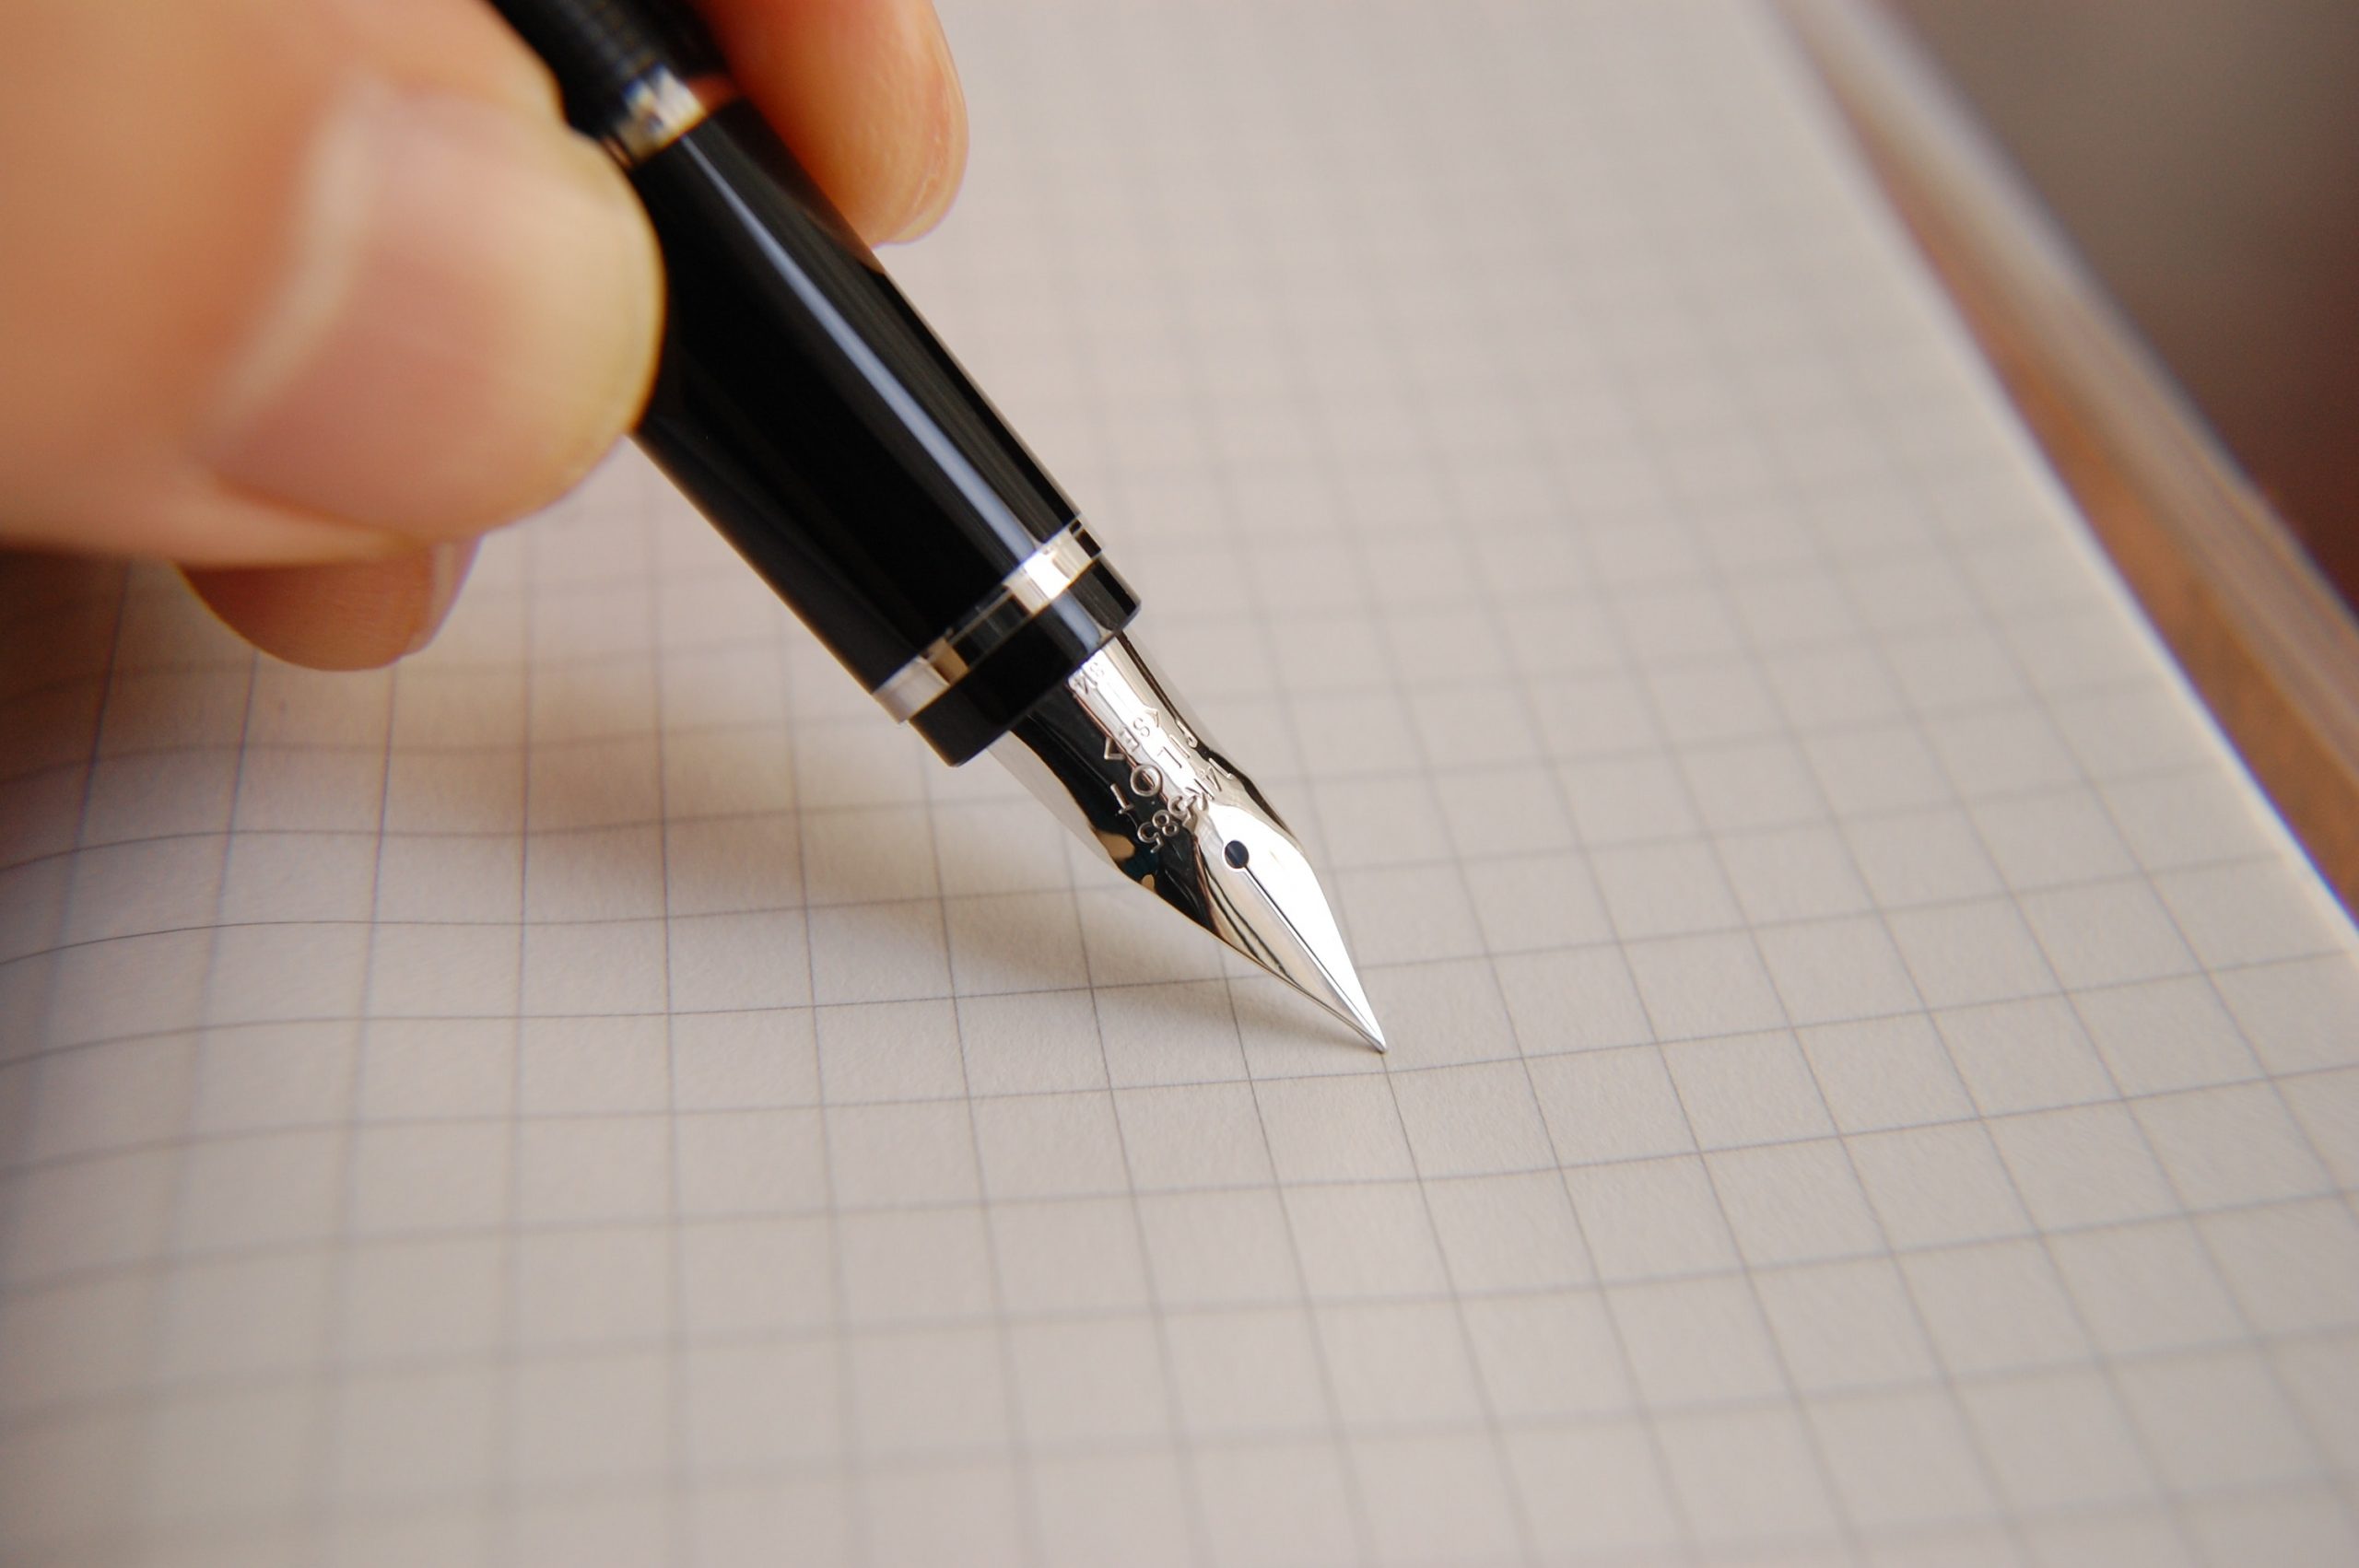 A black fountain pen is pressed against a grid paper